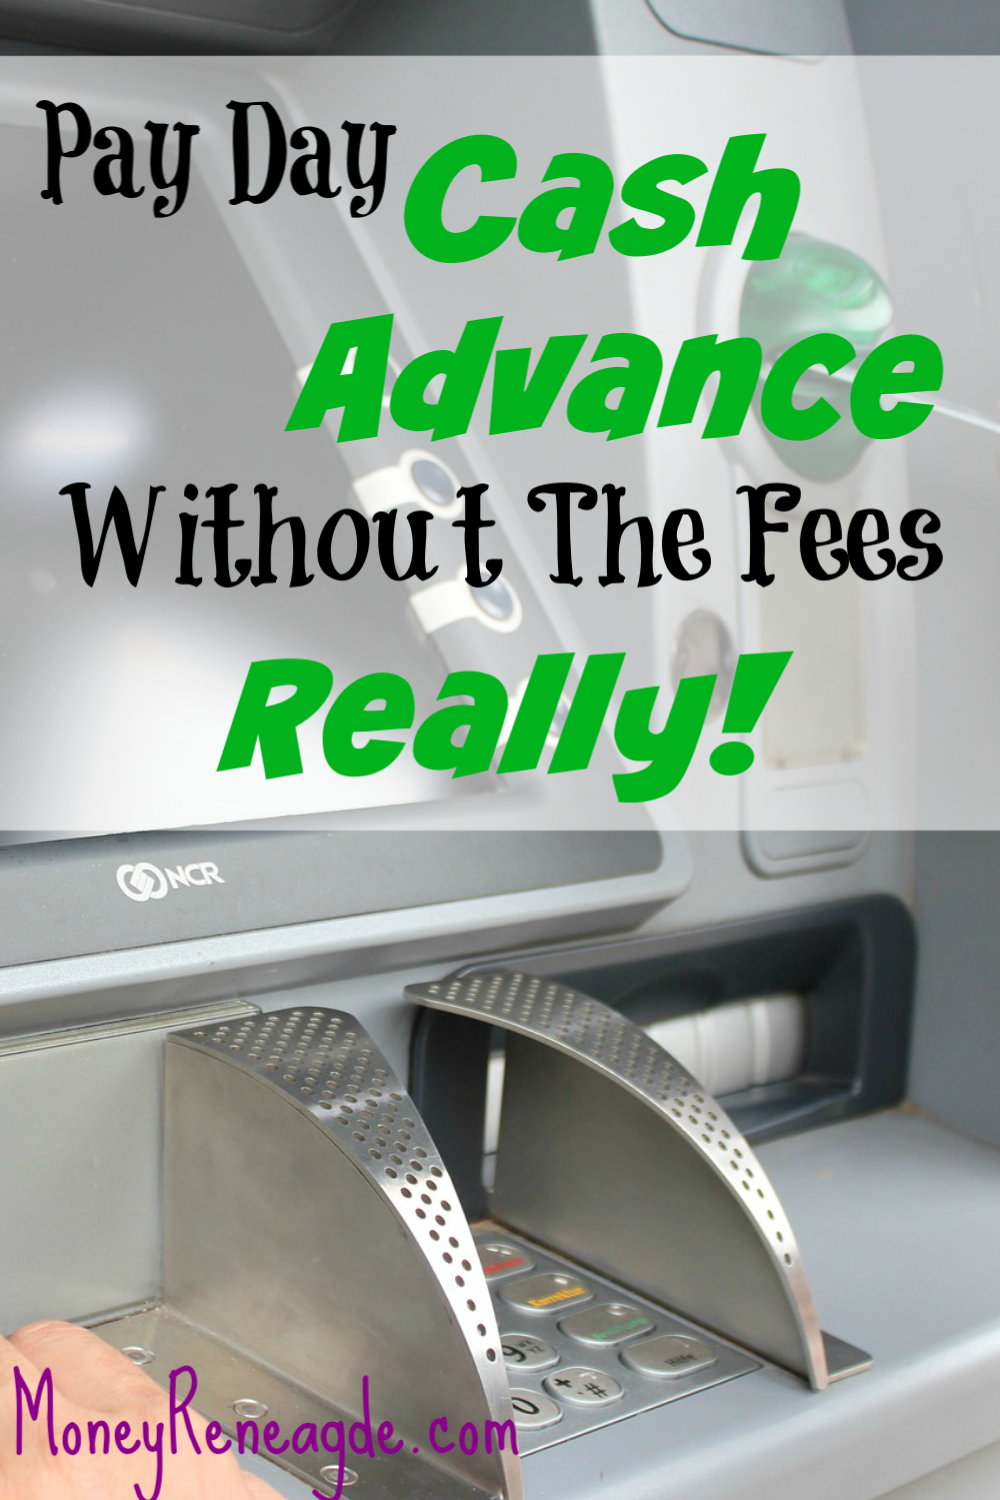 Payday Cash Advance Without Fees, Really!